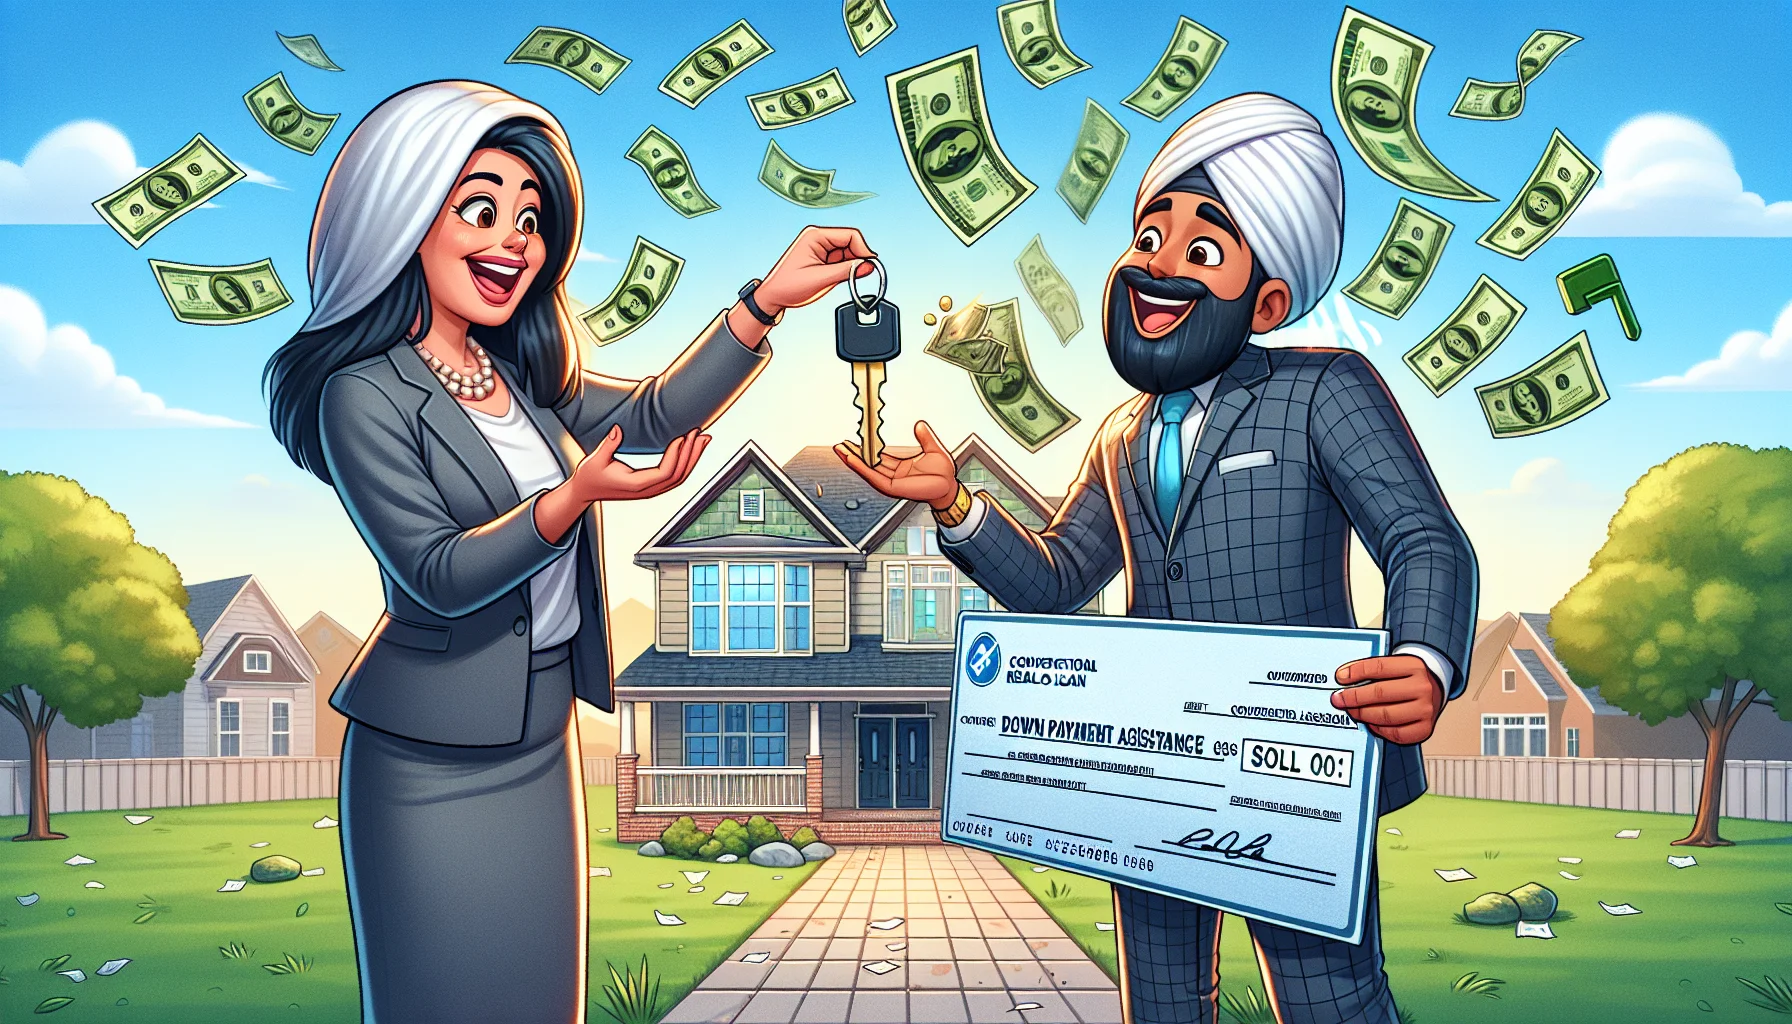 Create an image that humorously and realistically illustrates the ideal scenario for obtaining down payment assistance with a conventional loan in real-estate. The scene should feature a jovial, South Asian female real estate agent handing over giant keys to a delightful Middle Eastern male client. They are at the front of a beautiful, bright suburban home with a 'sold' sign in the front yard. The buyer is ecstatic, and his joy is represented by raining dollar bills from the sky, that he's trying to catch. At the side, an oversized cheque labeled 'Down Payment Assistance' is shown.